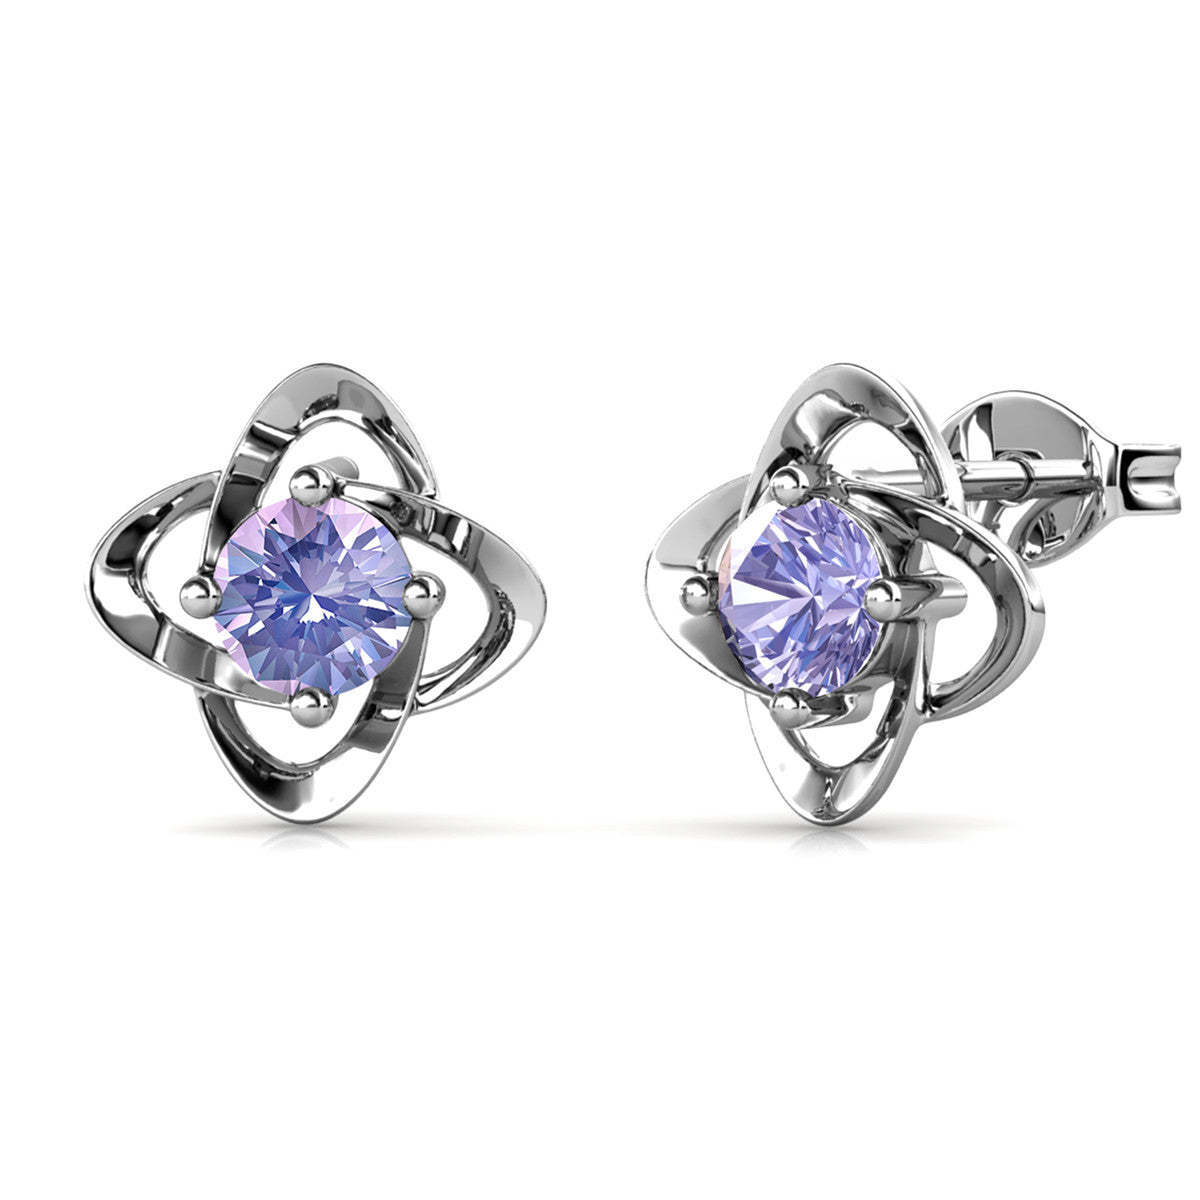 Infinity June Birthstone Alexandrite Earrings, 18k White Gold Plated Silver Birthstone Earrings with Crystals